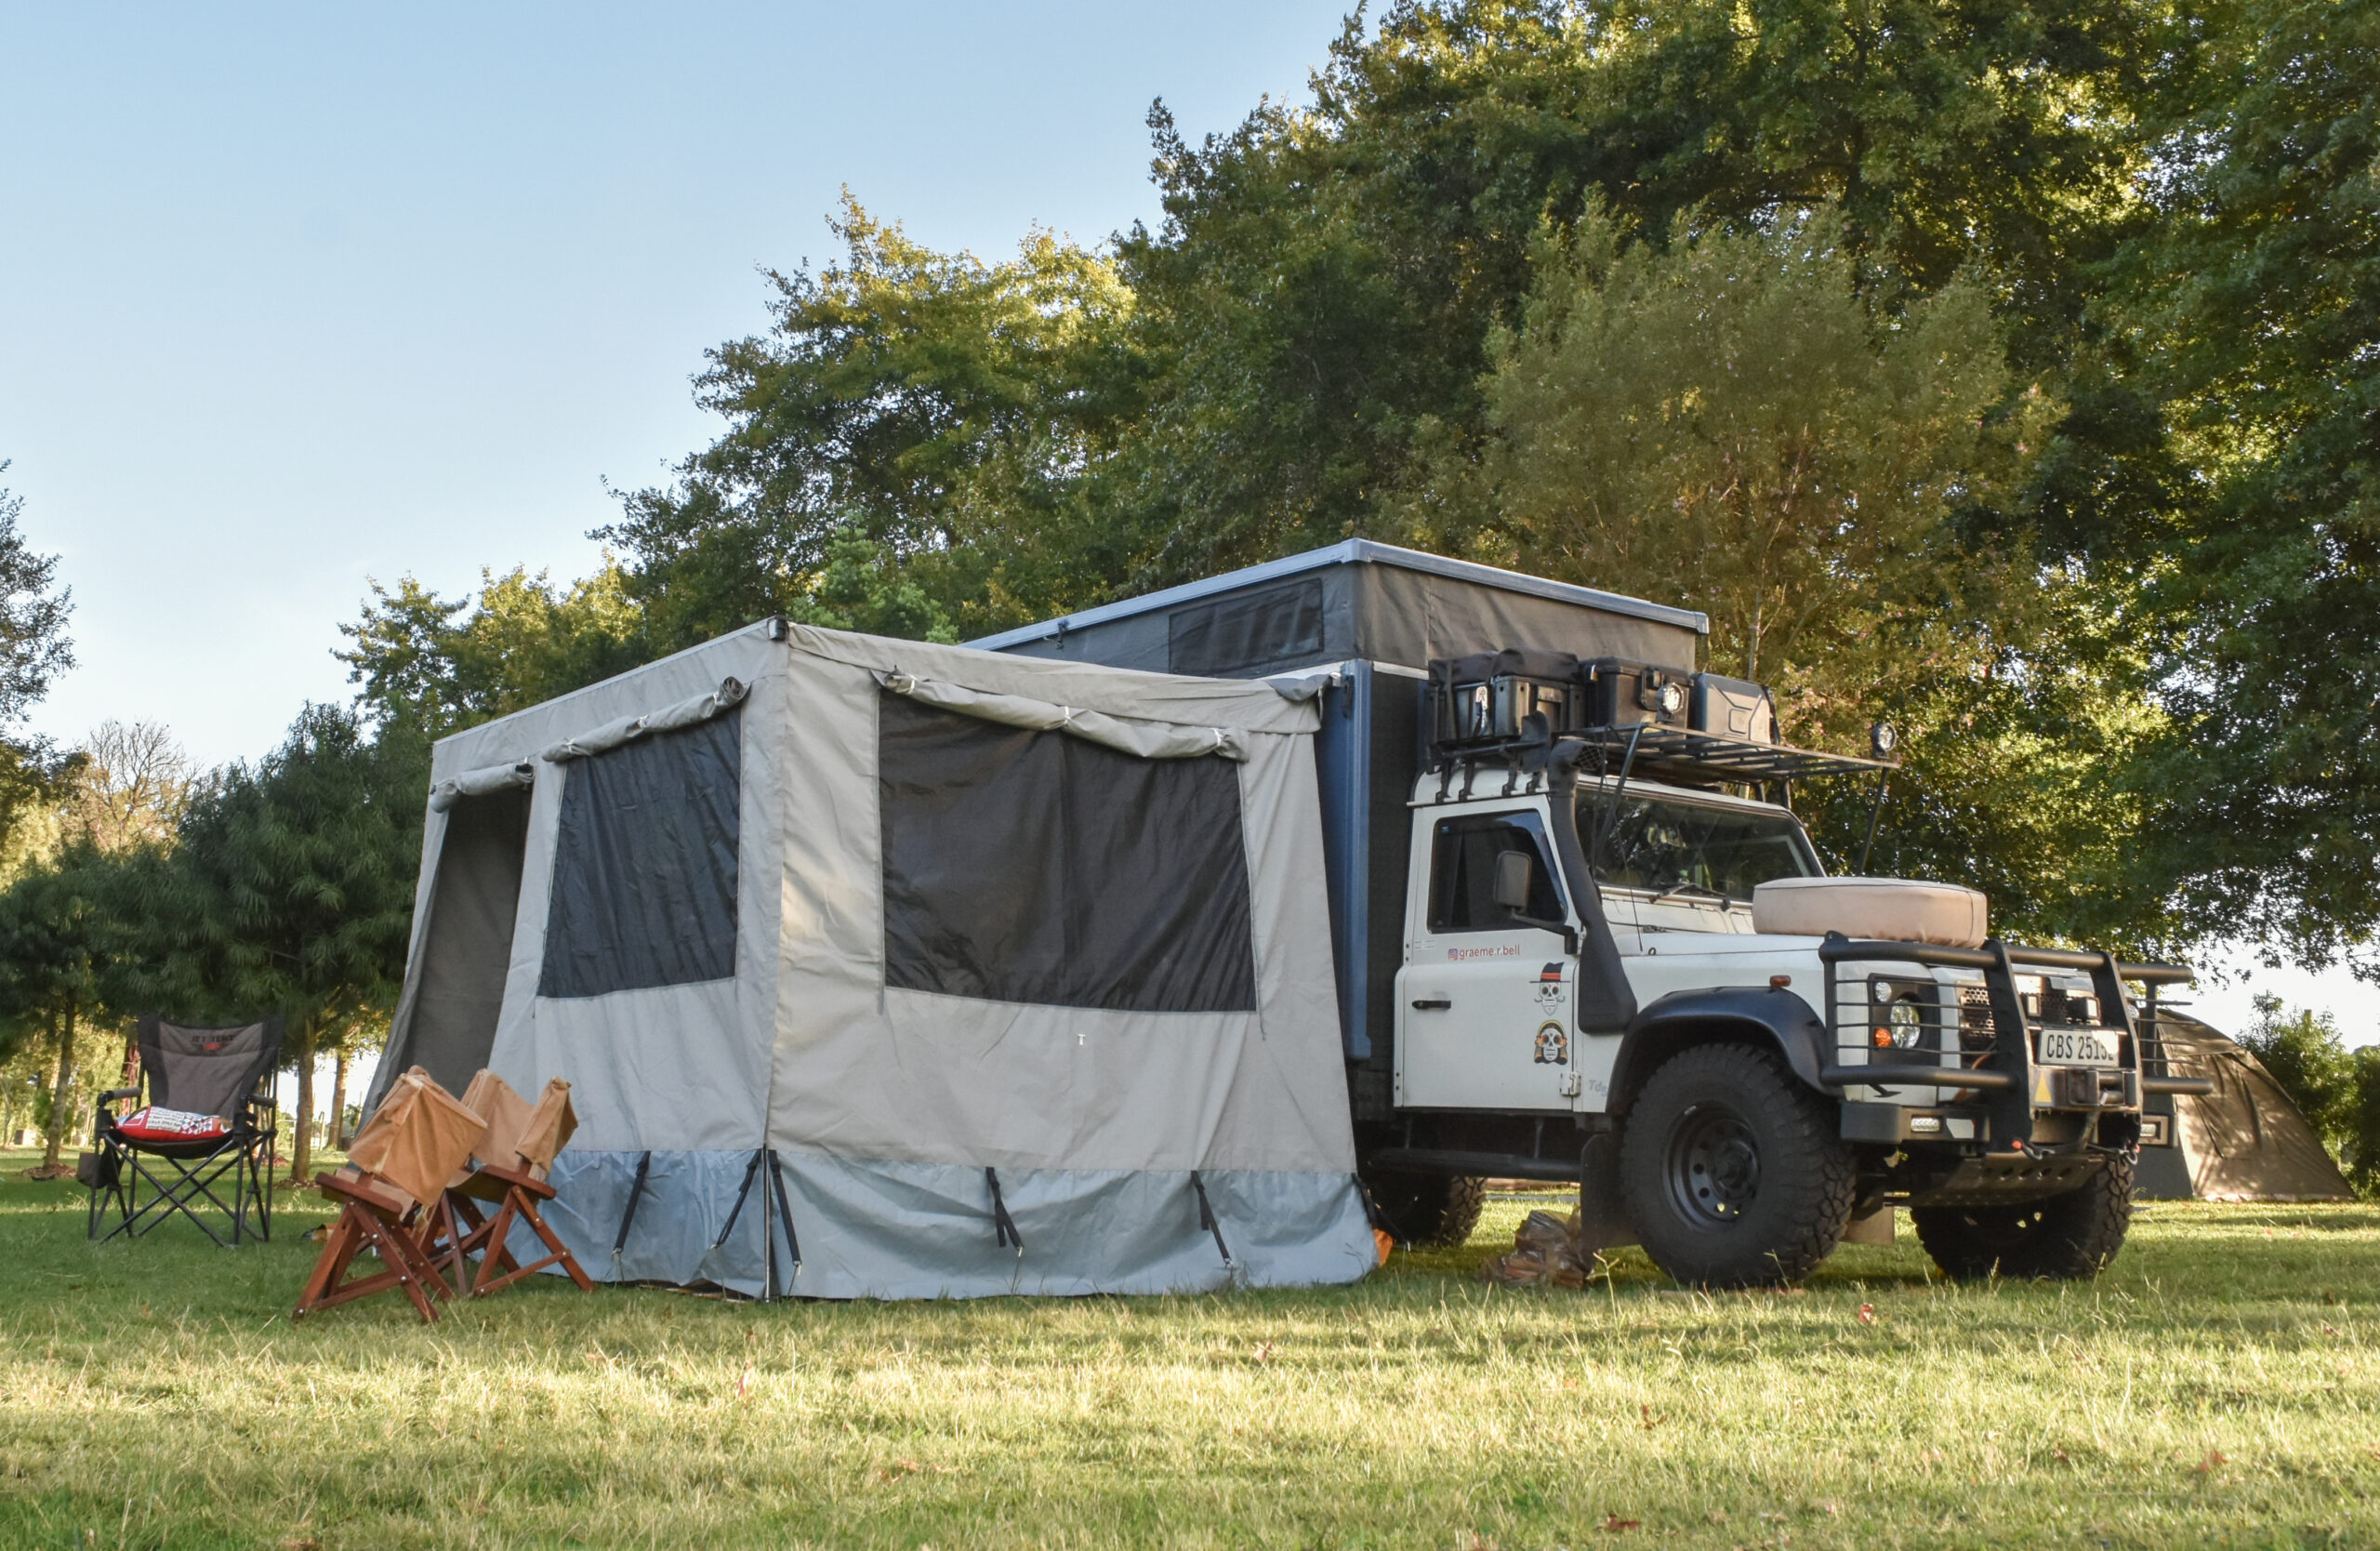 The new Defender can hold up to four passengers.